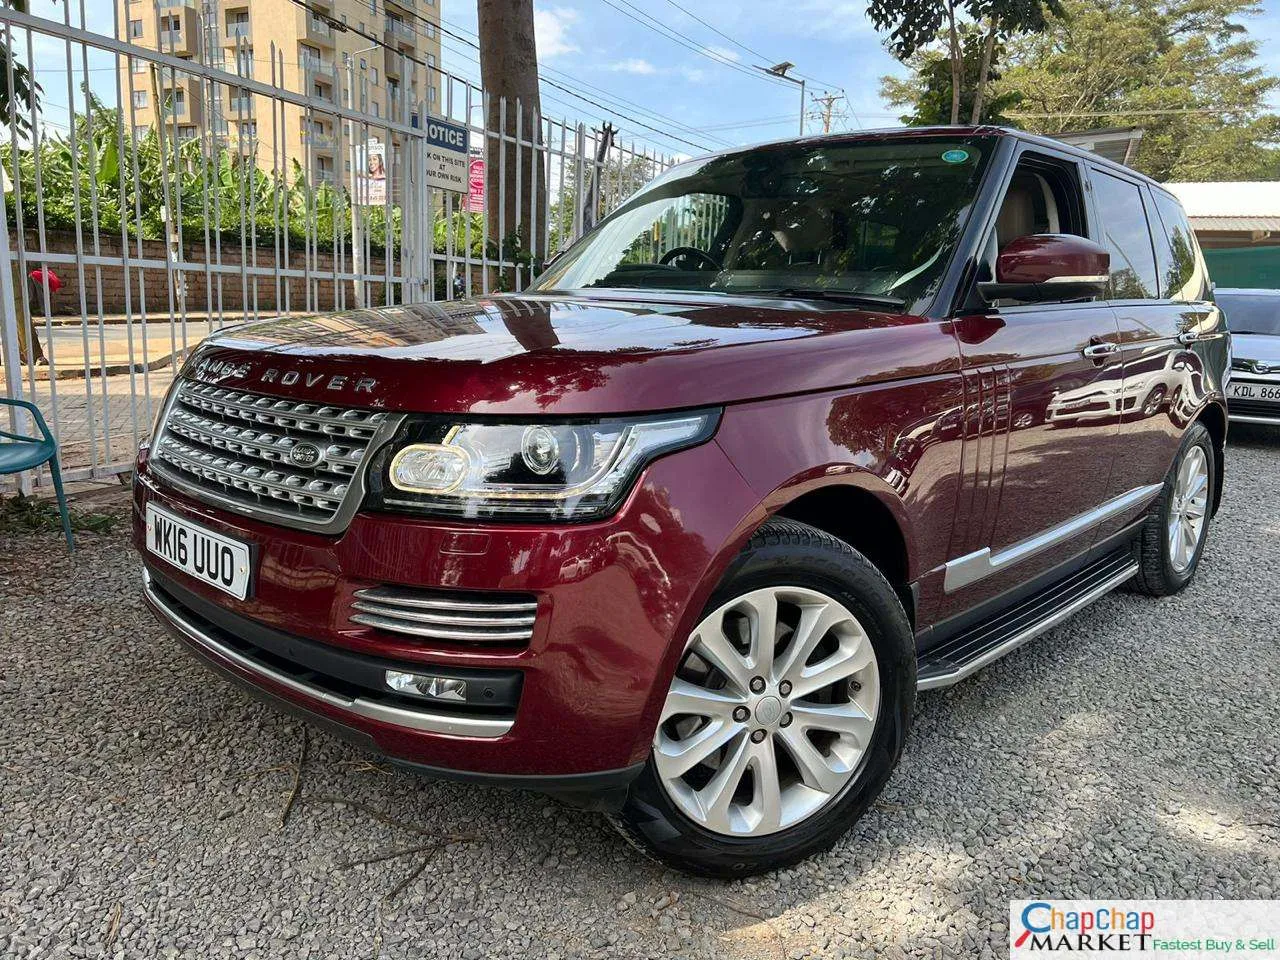 RANGE ROVER VOGUE You Pay 40% DEPOSIT TRADE IN OK vogue For sale in kenya exclusive